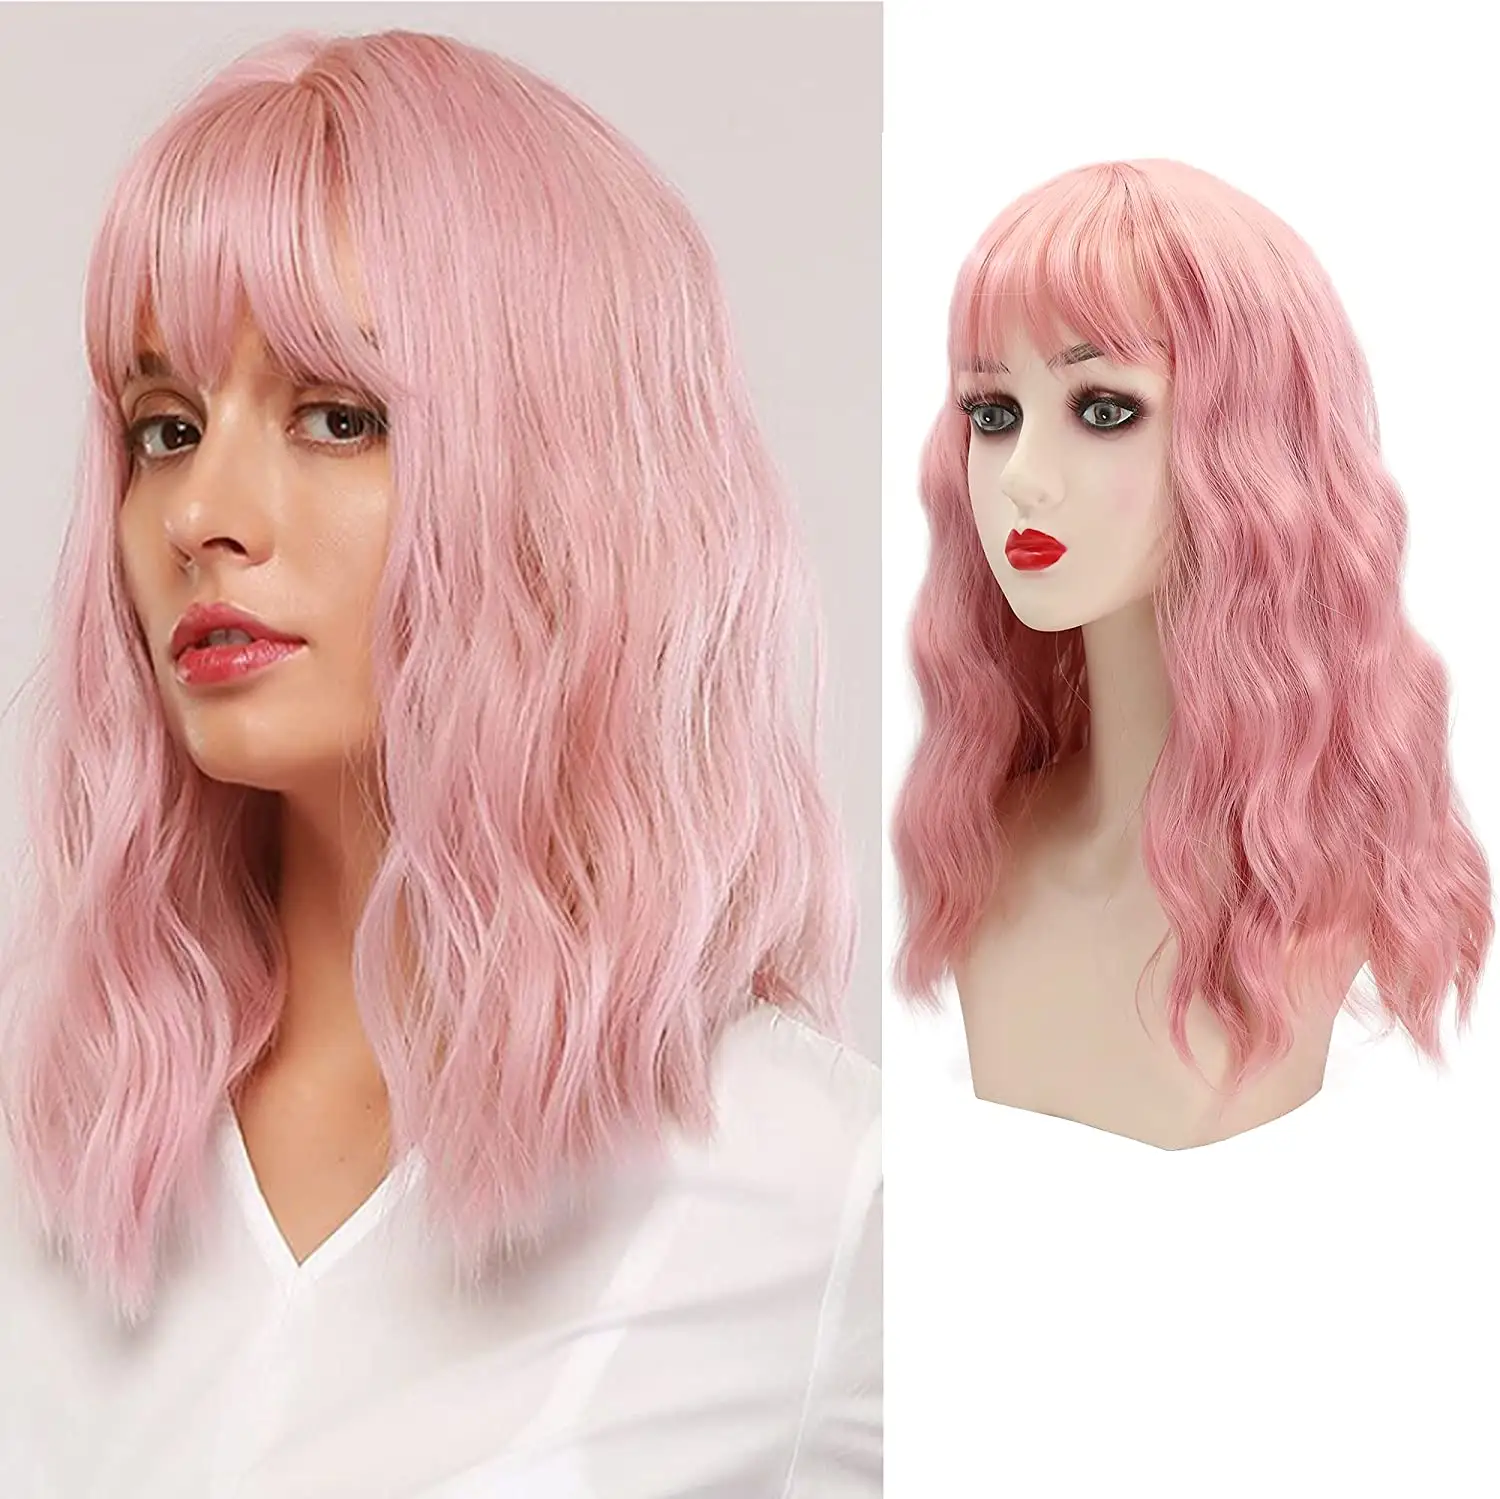 Wig with Bangs for Women Short Wavy Bob Colorful Medium Length Pastel Colored Cosplay Wig Synthetic Costume Wigs